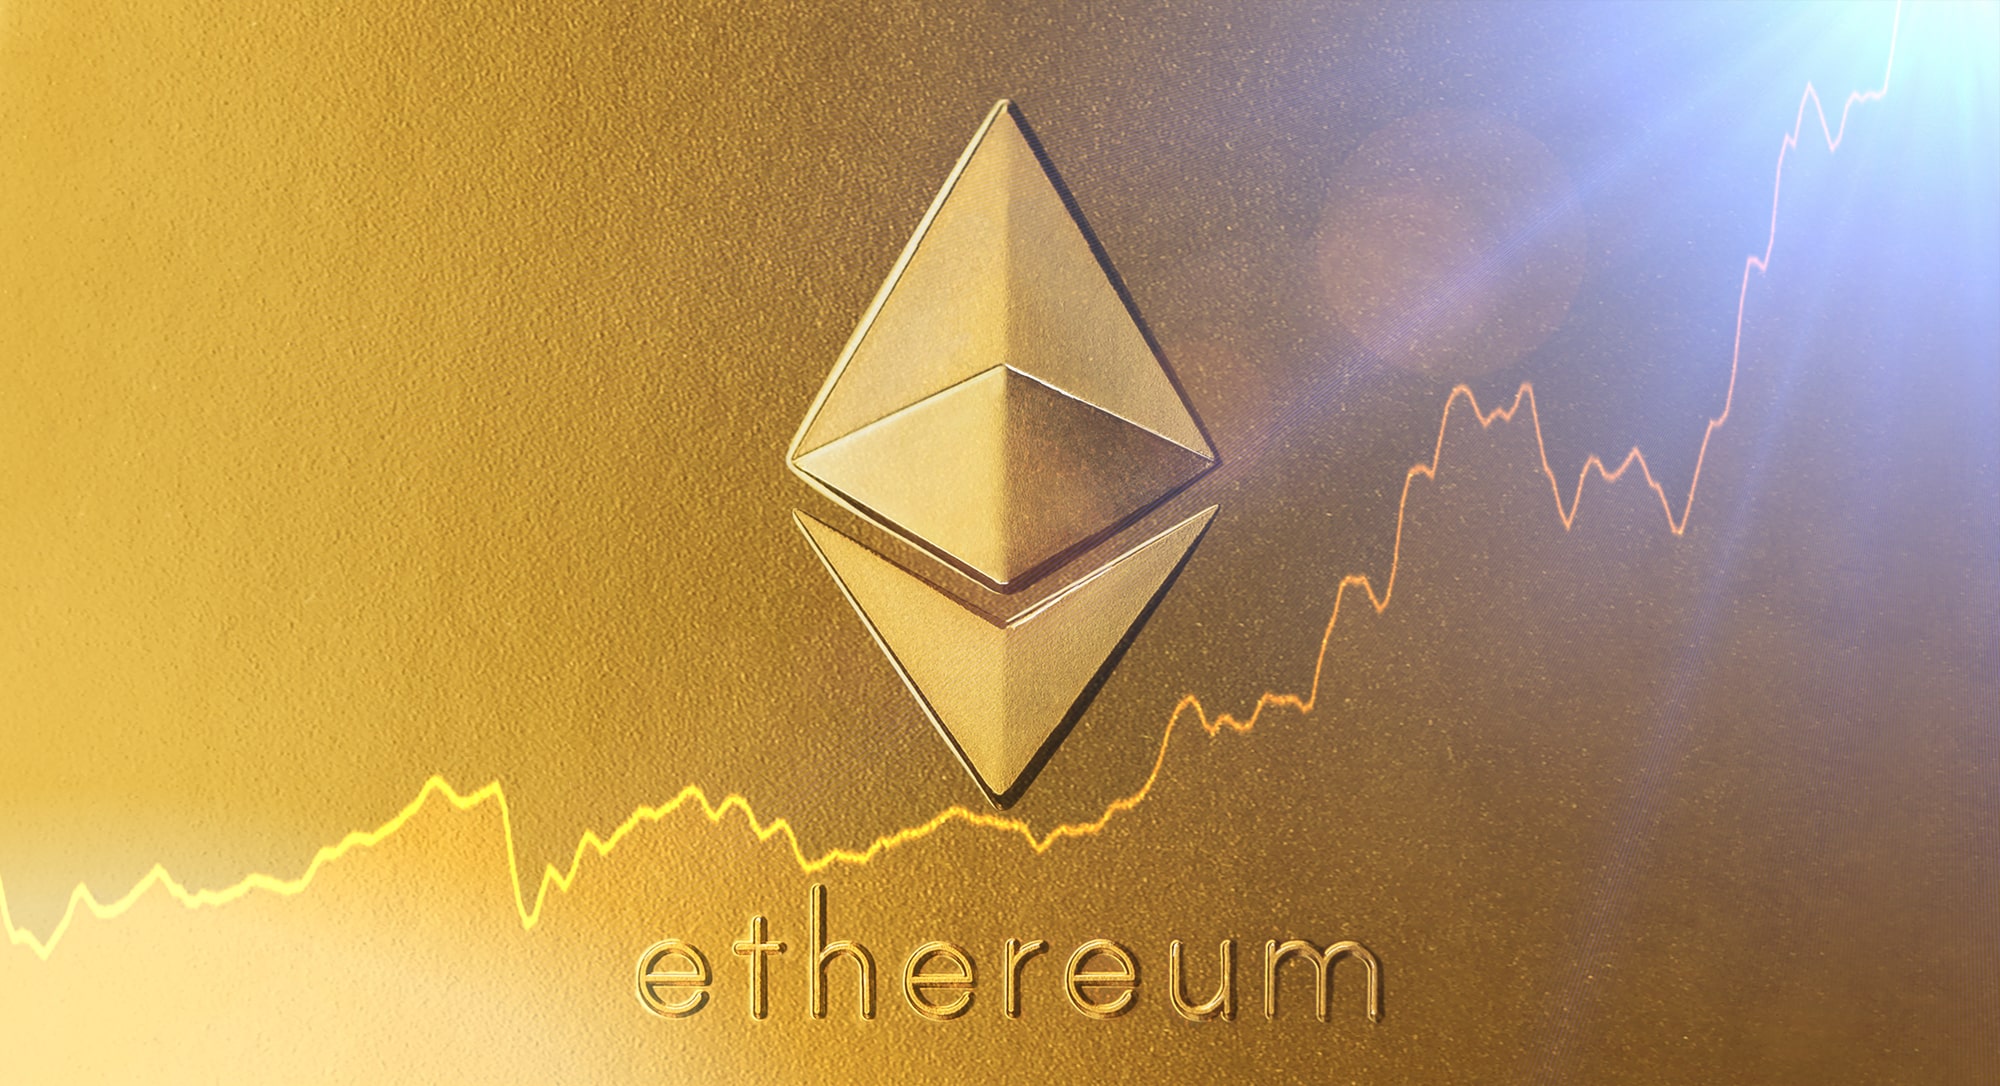 5 Questions to Ask About Ethereum’s Potential